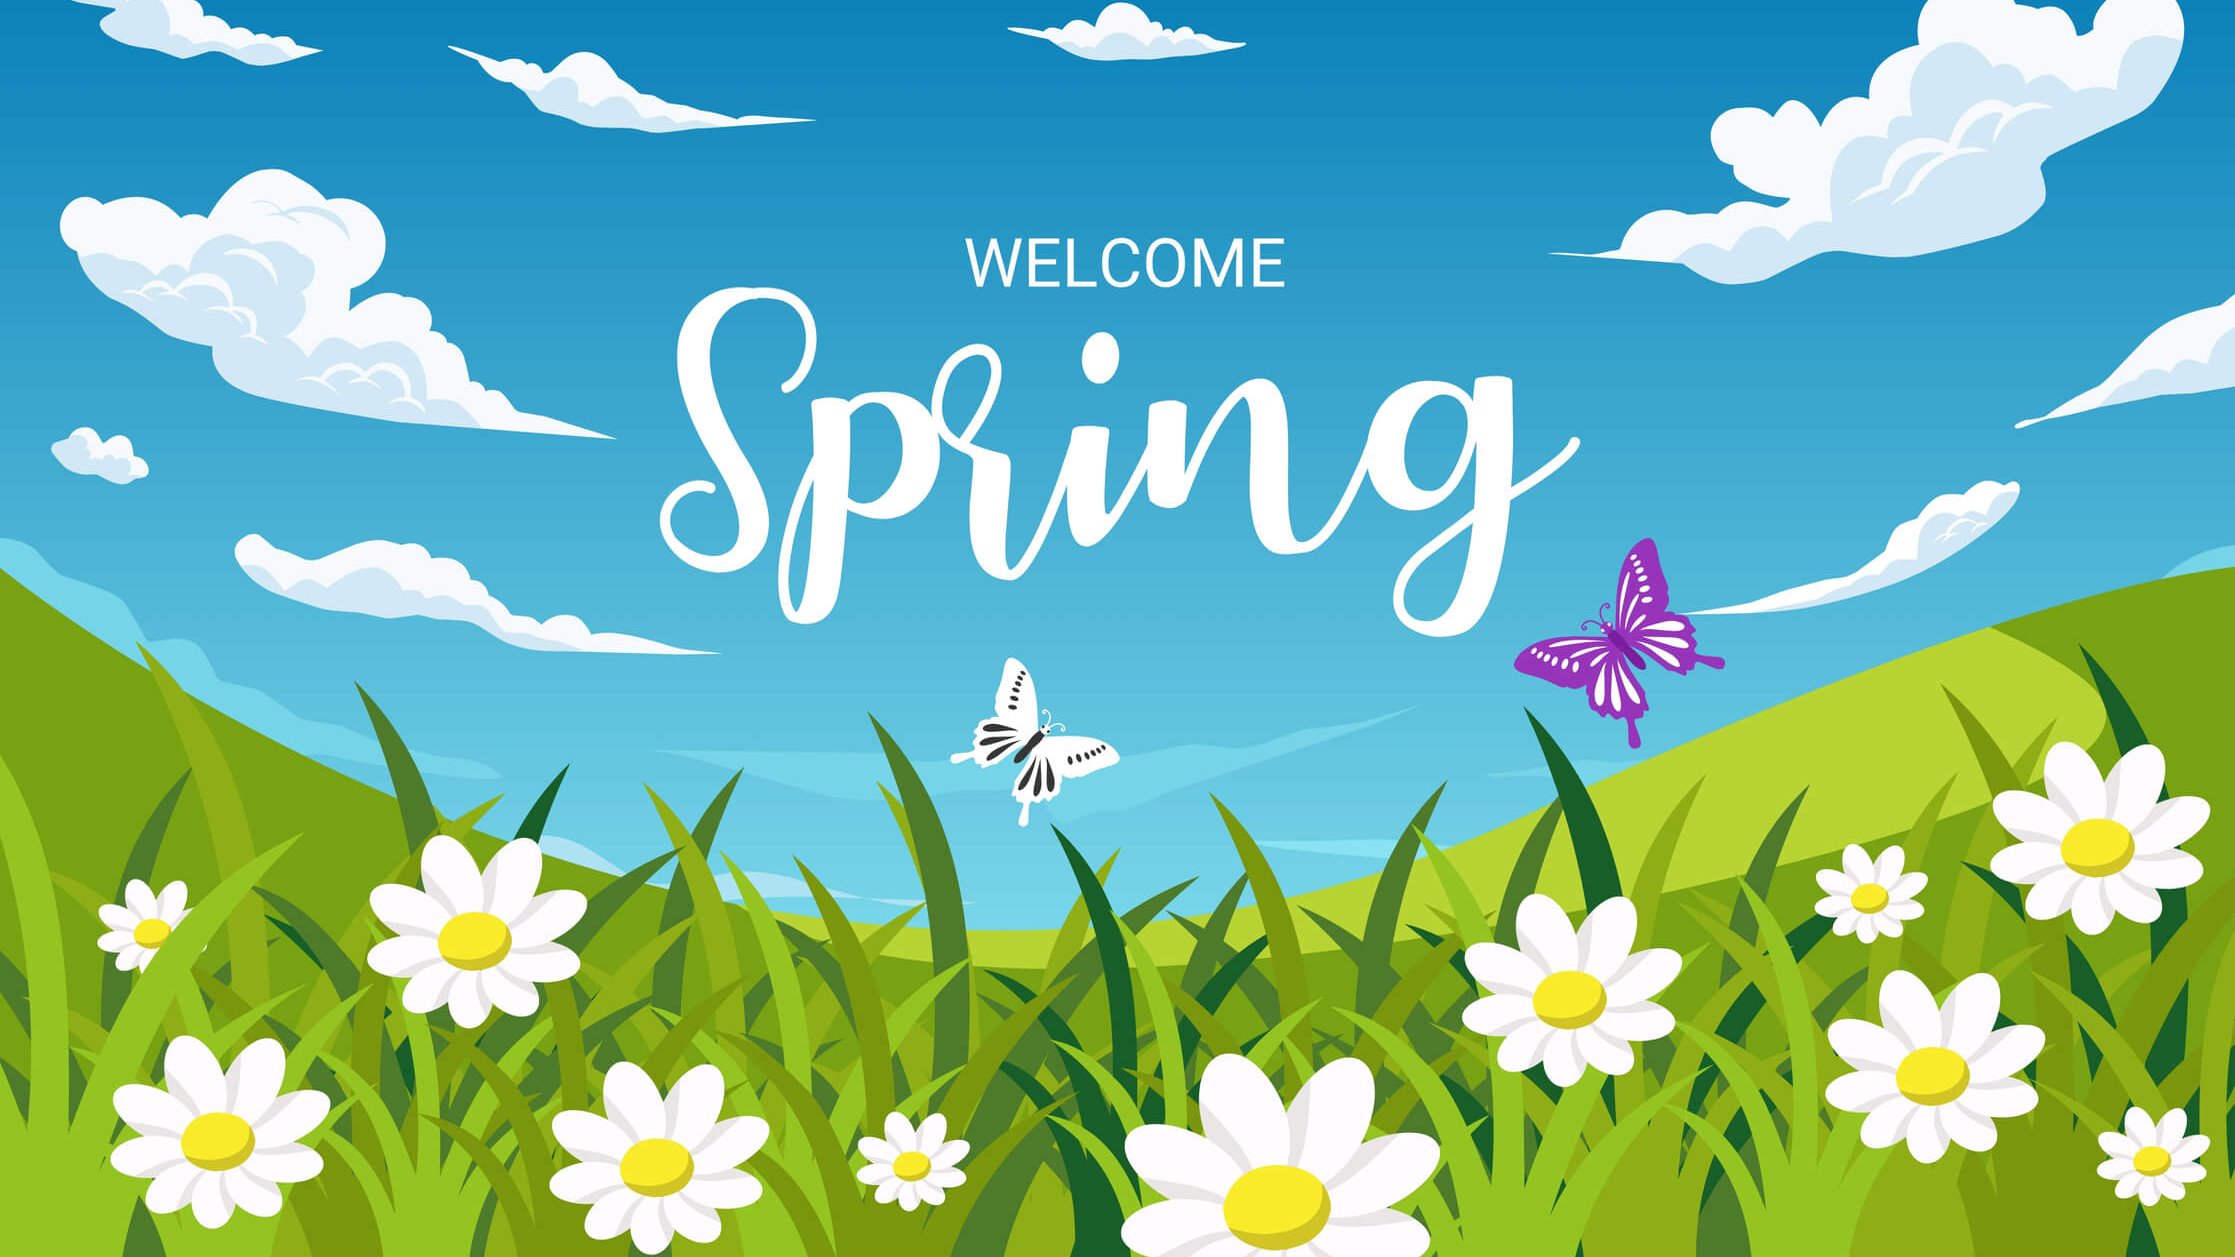 Prepare For Spring With Fresh Digital Signage Apps